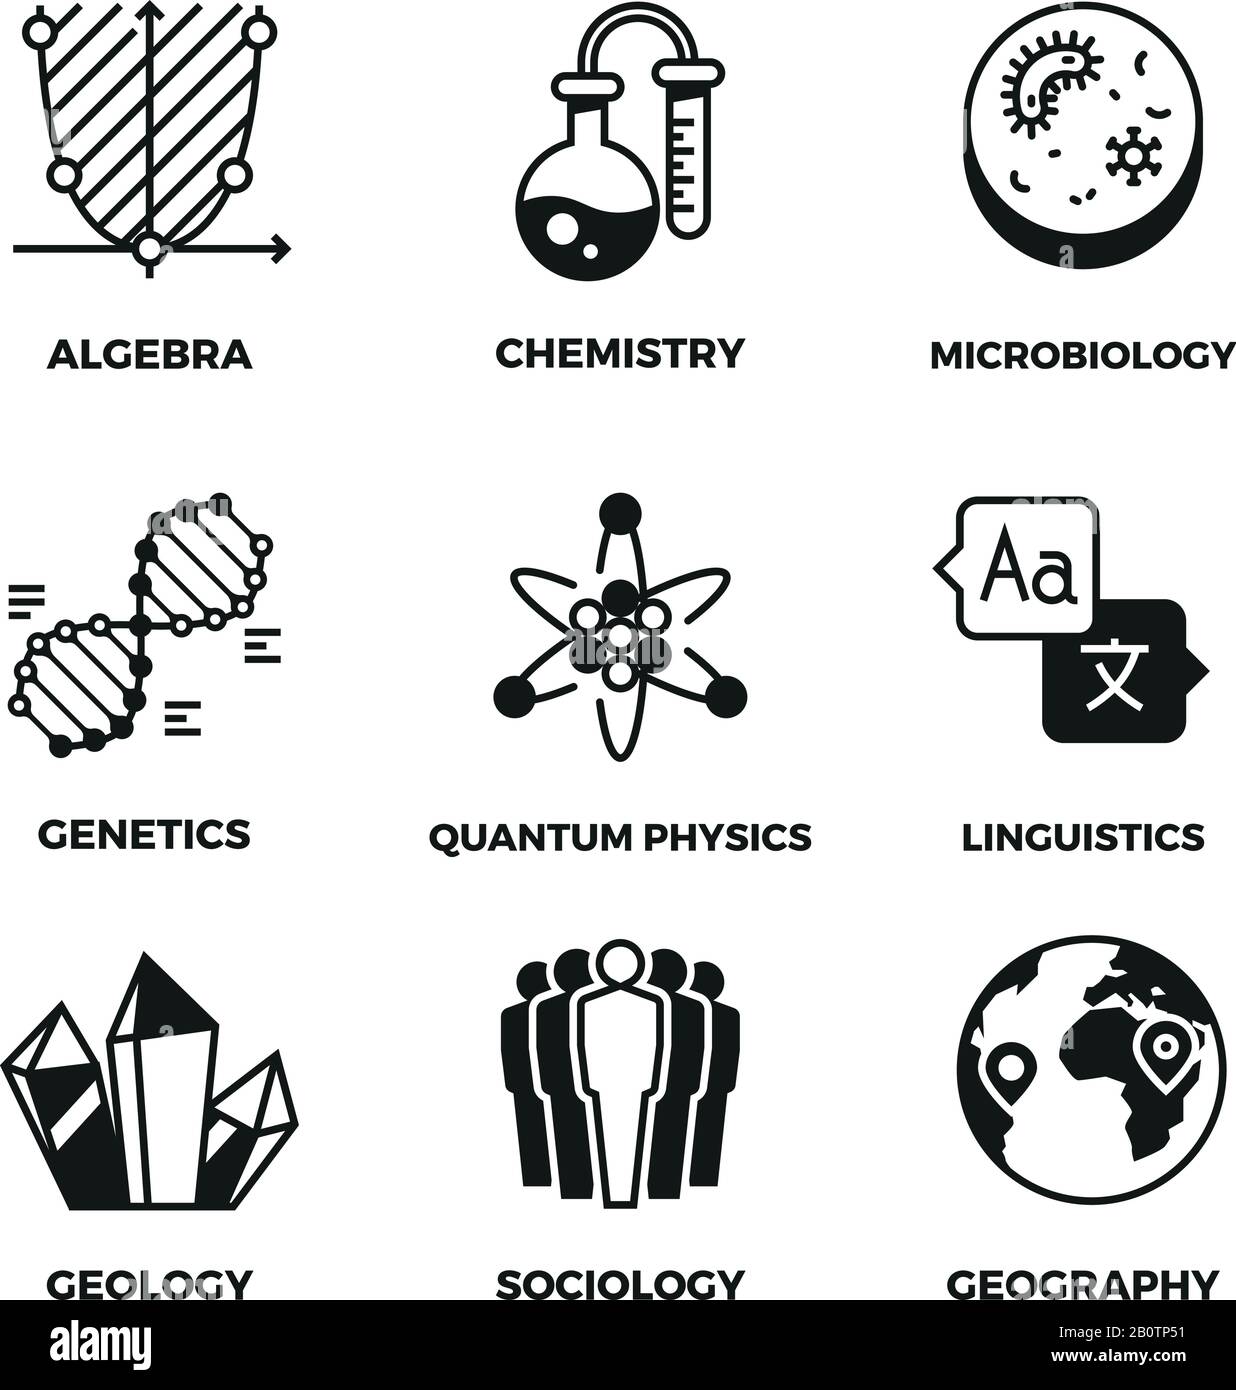 Science vector pictograms. Genetics and algebra, chemistry and biology, geography and sociology, linguistics and quantum physics symbols. Mathematics and globe, studying physics and geography illustration Stock Vector